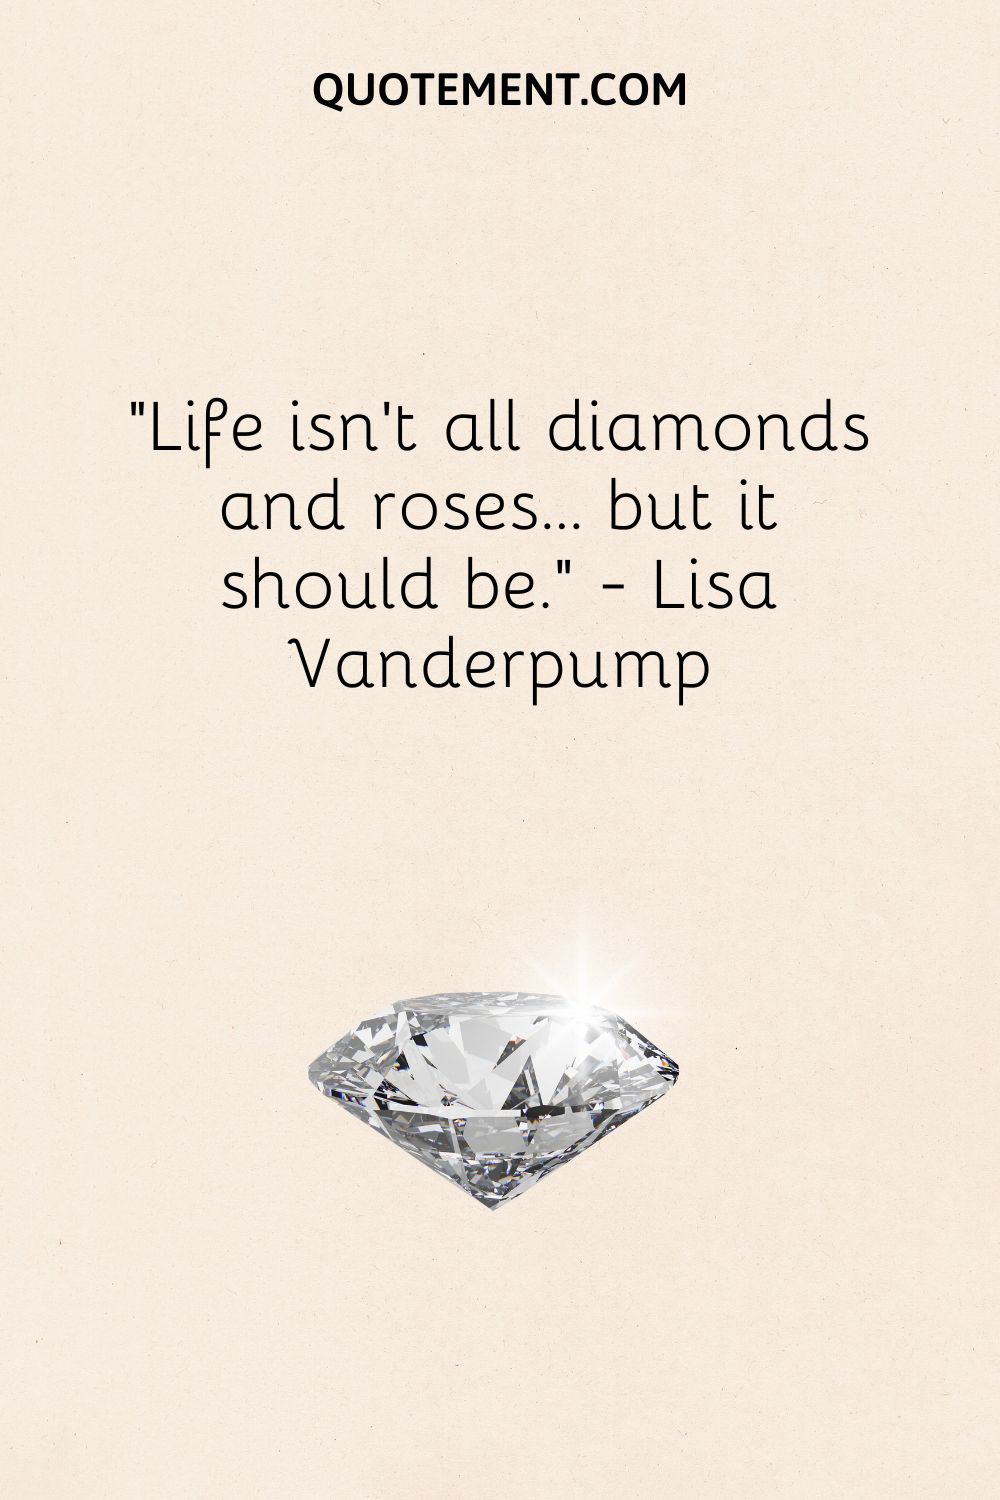 Life isn’t all diamonds and roses… but it should be